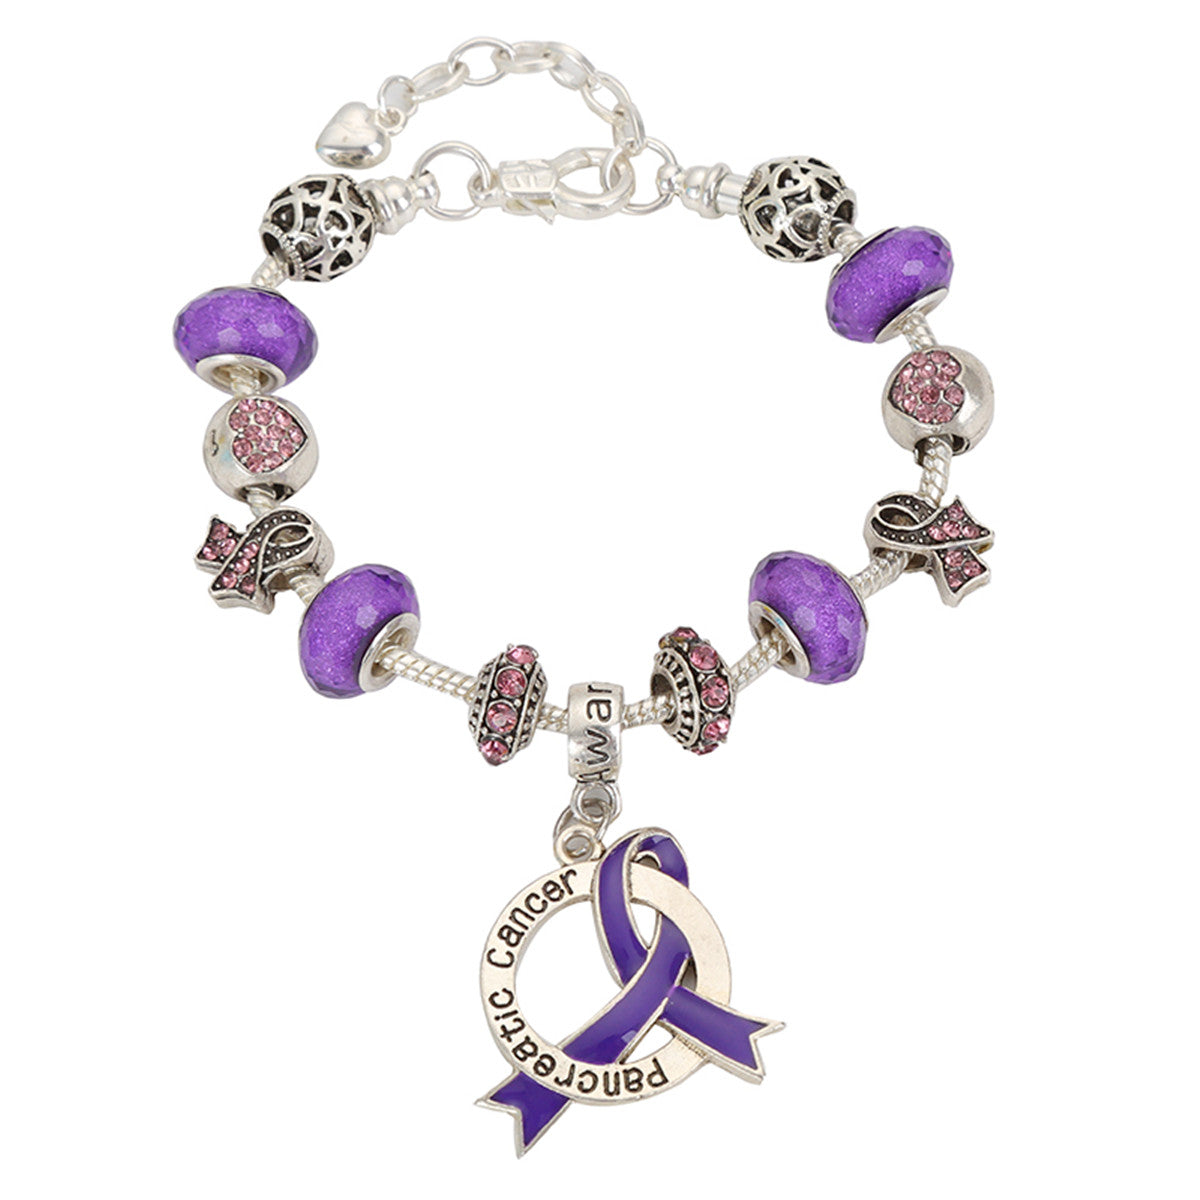 Amazoncom 25  I Support Pancreatic Cancer Awareness Bracelets 100  Medical Grade Silicone  Latex and Toxin Free  25 Bracelets  Show Your  Support For Pancreatic Cancer Awareness  Clothing Shoes  Jewelry